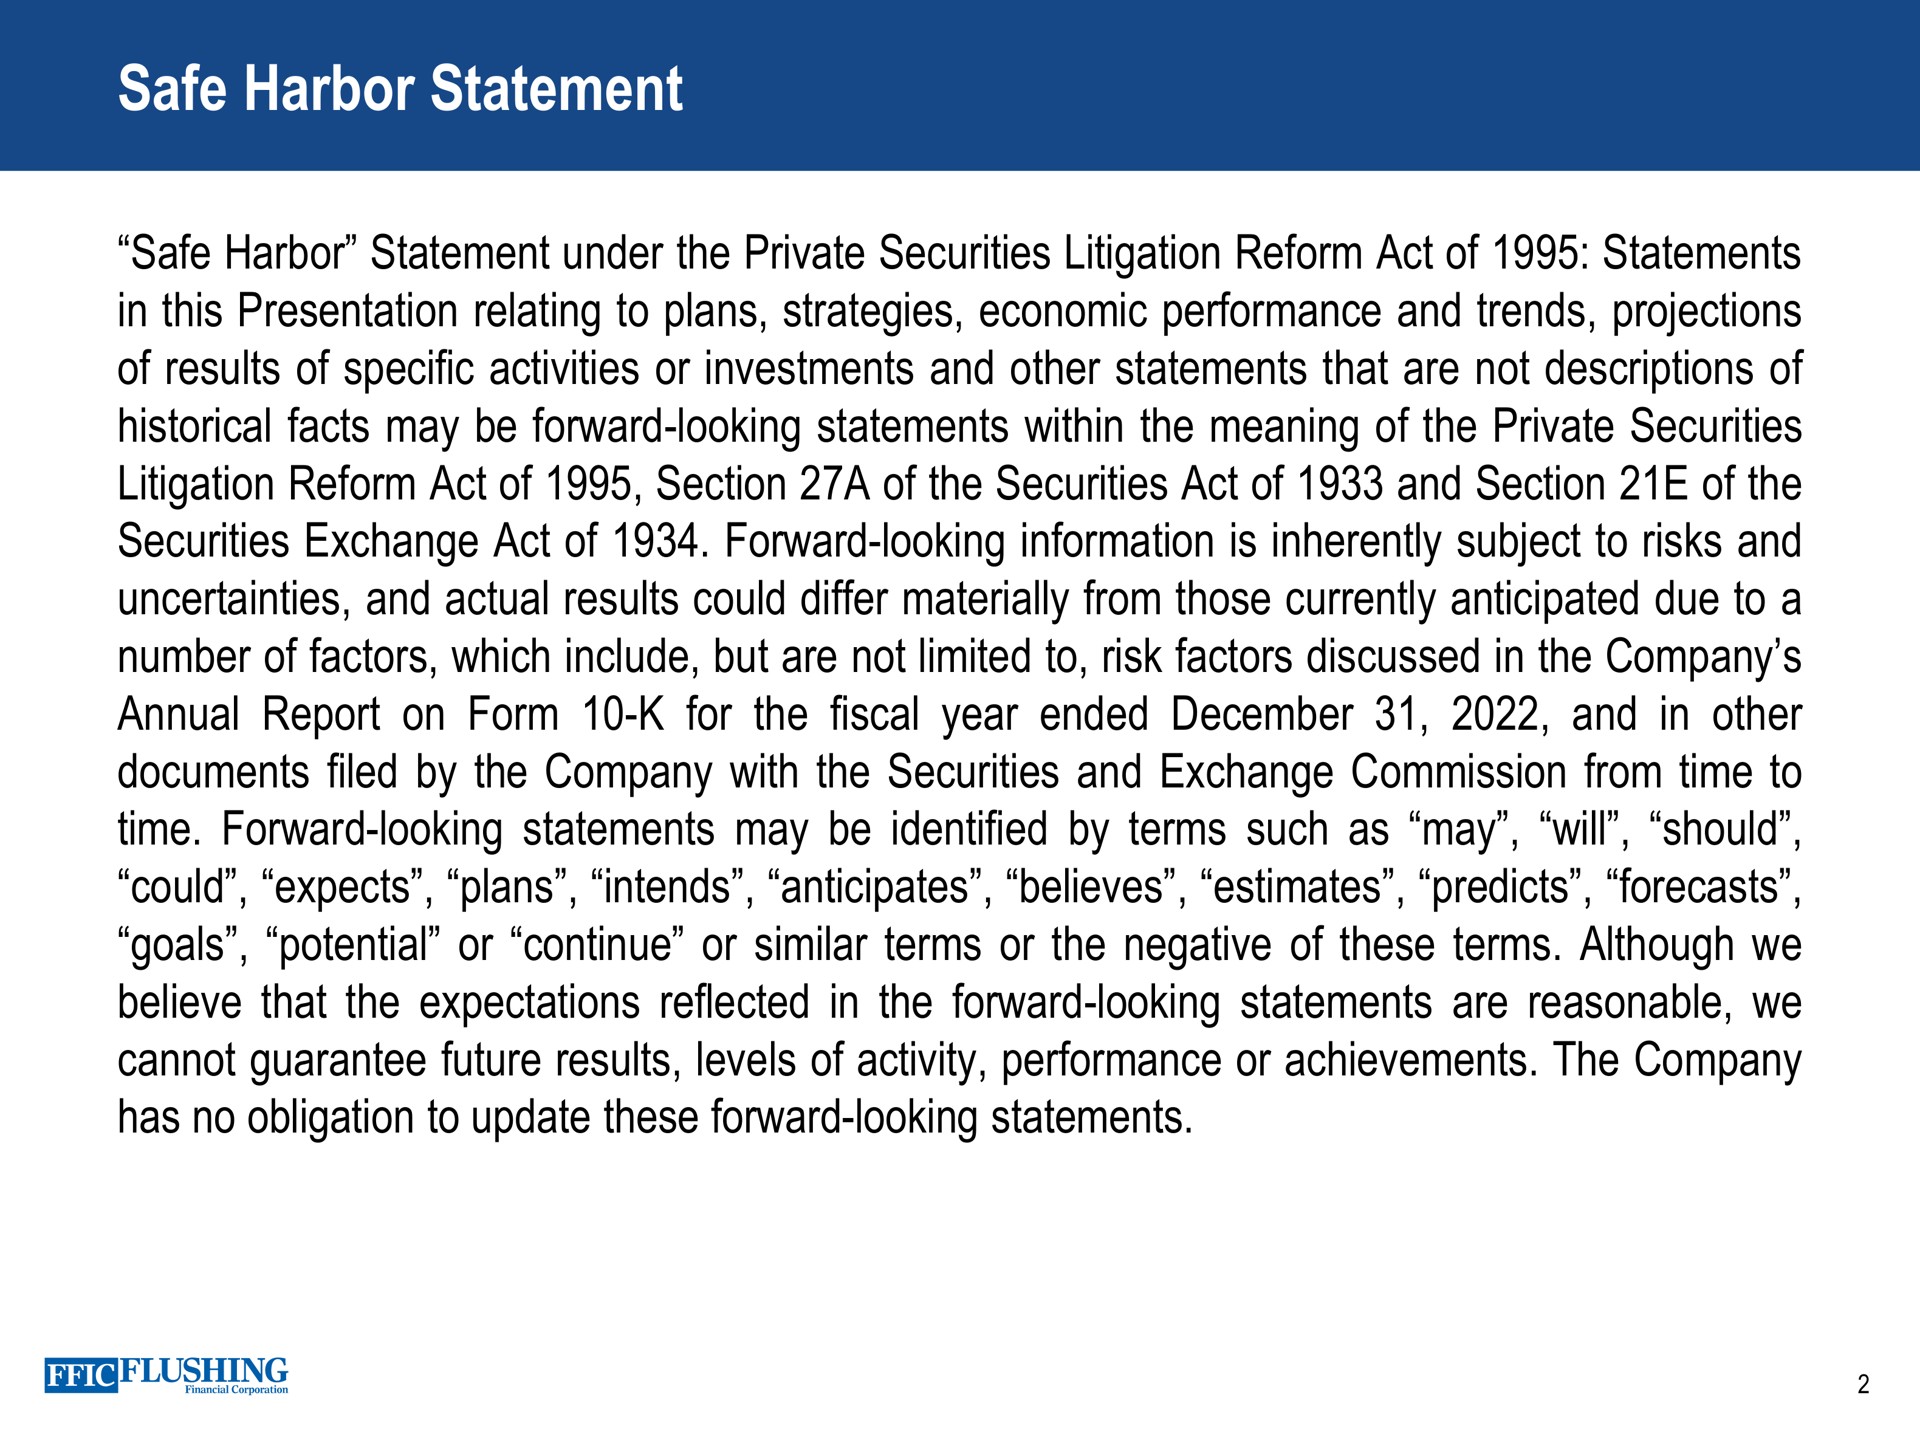 safe harbor statement under the private securities litigation reform act of statements in this presentation relating to plans strategies economic performance and trends projections of results of specific activities or investments and other statements that are not descriptions of historical facts may be forward looking statements within the meaning of the private securities litigation reform act of section a of the securities act of and section of the securities exchange act of forward looking information is inherently subject to risks and uncertainties and actual results could differ materially from those currently anticipated due to a number of factors which include but are not limited to risk factors discussed in the company annual report on form for the fiscal year ended and in other documents filed by the company with the securities and exchange commission from time to time forward looking statements may be identified by terms such as may will should could expects plans intends anticipates believes estimates predicts forecasts goals potential or continue or similar terms or the negative of these terms although we believe that the expectations reflected in the forward looking statements are reasonable we cannot guarantee future results levels of activity performance or achievements the company has no obligation to update these forward looking statements | Flushing Financial